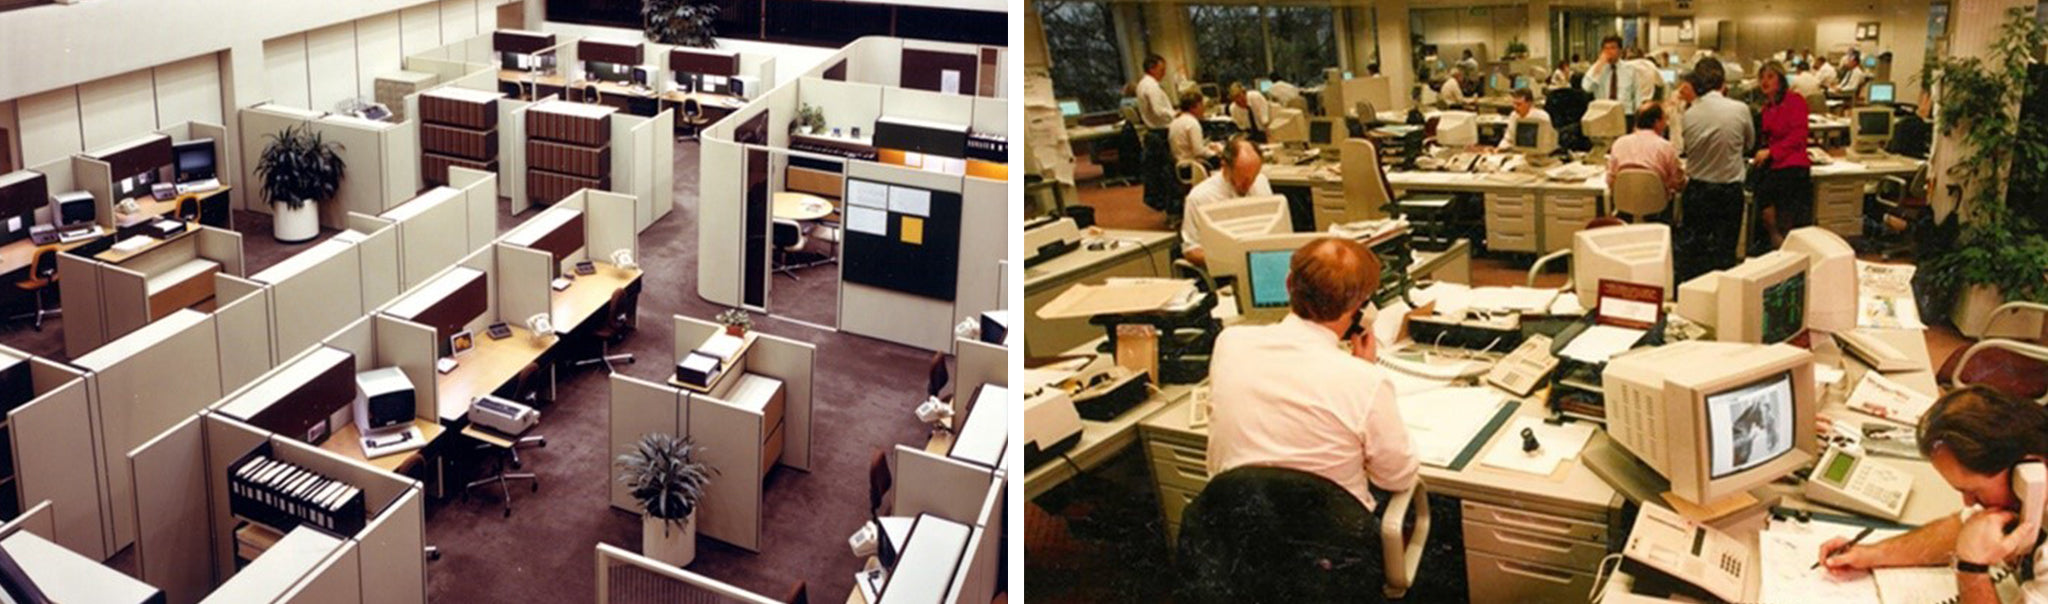 Closed and Open Office Plans in the 1980s-90s. (Image Credit: frovi.co.uk)